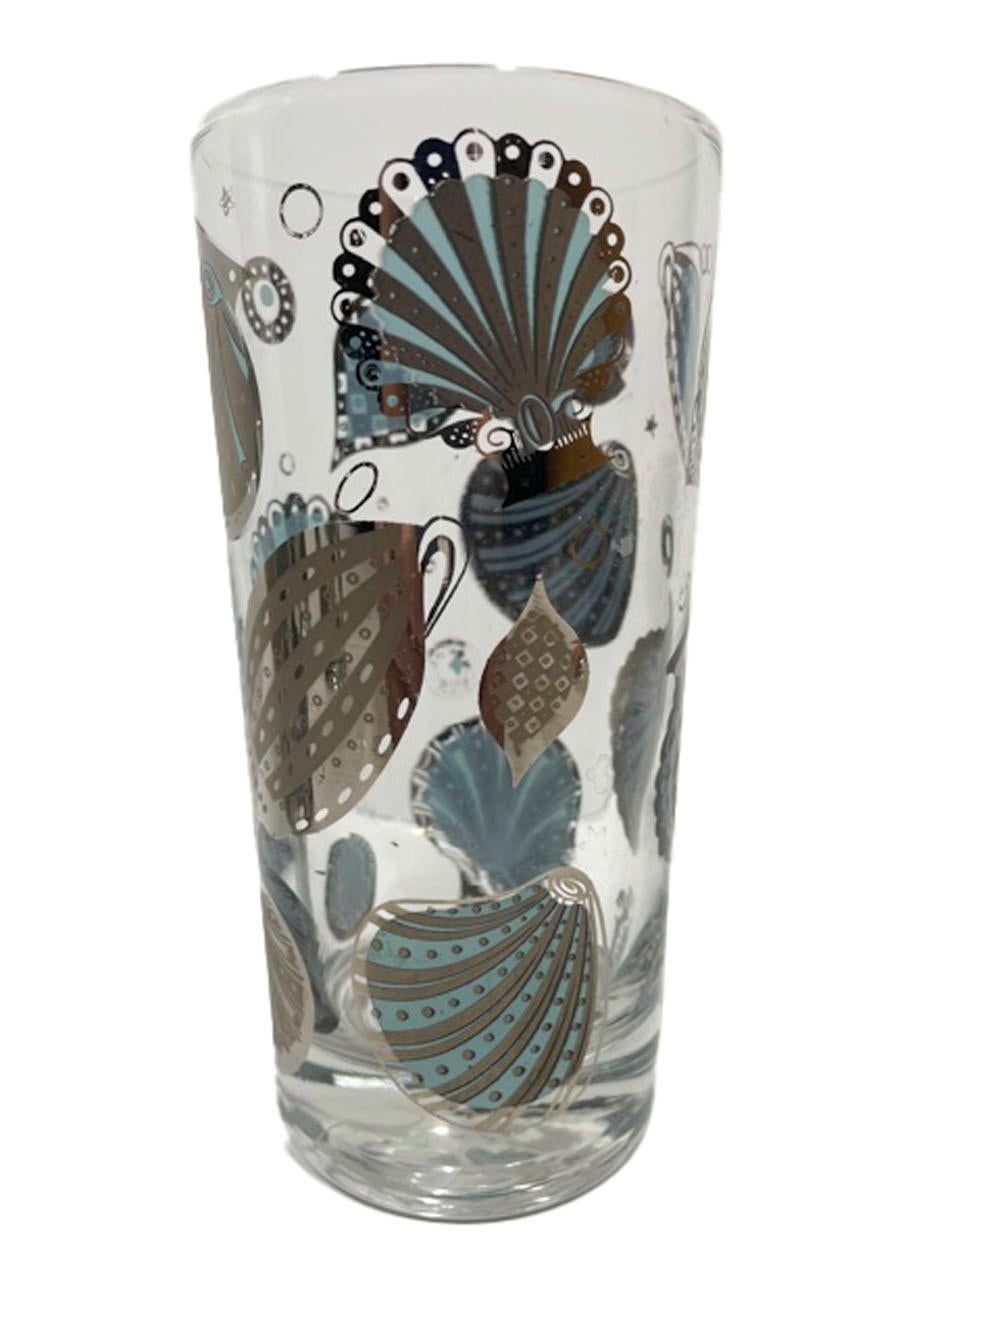 Set of 6 vintage highball glasses in the silver version of the Seascape pattern by Georges Briard, having a variety of seashells on the exterior in silver over blue enamel with just small accents of the blue visible on the exterior, the interior of